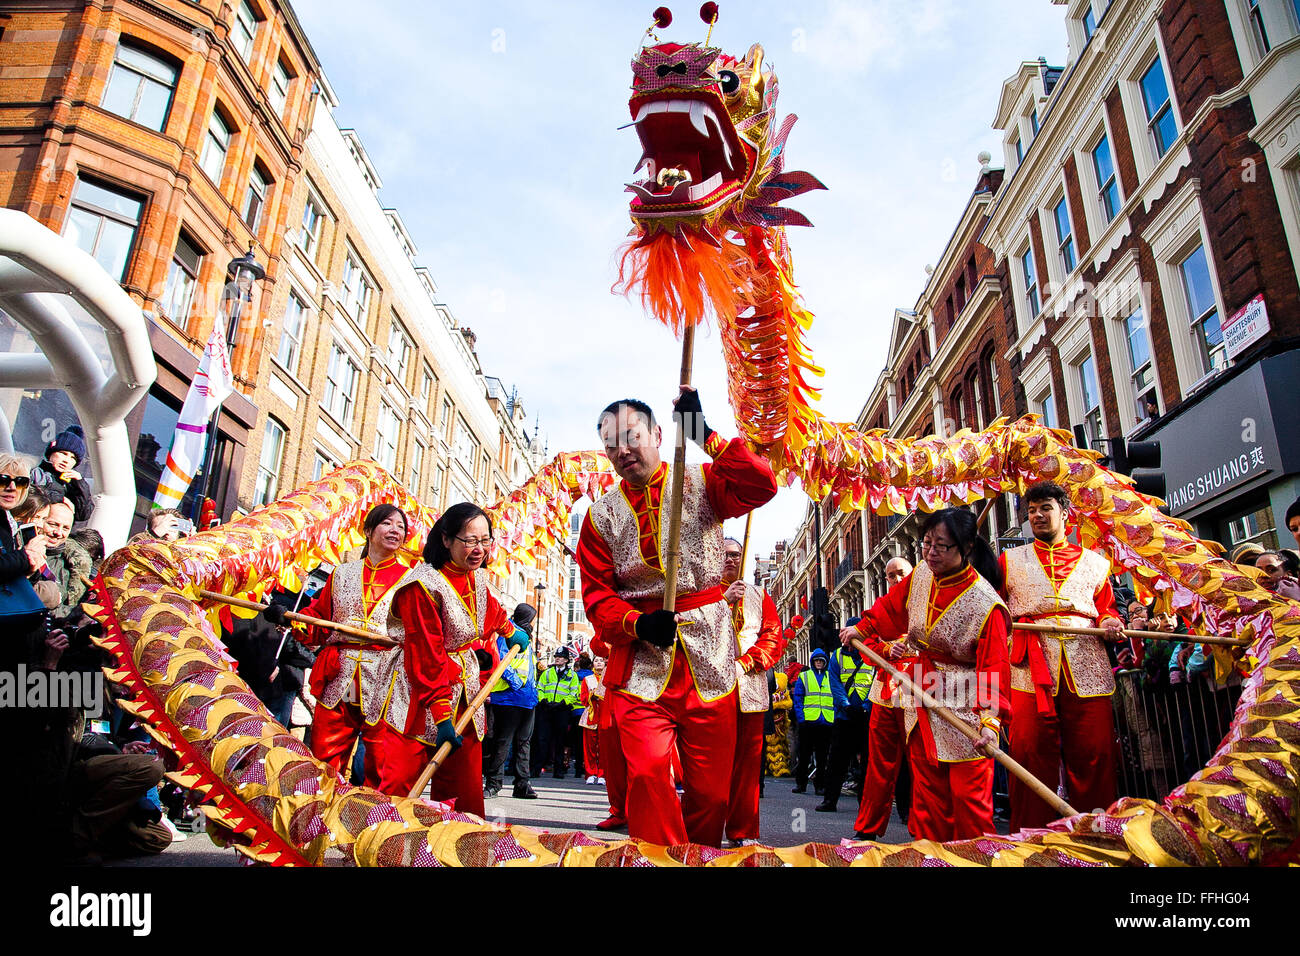 London, UK. 14th February 2016. The Chinese Dragon dances at the Chinese New Year Parade  2016 - The Year of the Monkey in central London with the biggest celebration outside of Asia. Costumed performers took part in the Chinese New Year Parade along Charing Cross Road and Chinatown, with further celebrations in Trafalgar Square. The event is organised by London Chinatown Chinese Association. Credit:  Dinendra Haria/Alamy Live News Stock Photo